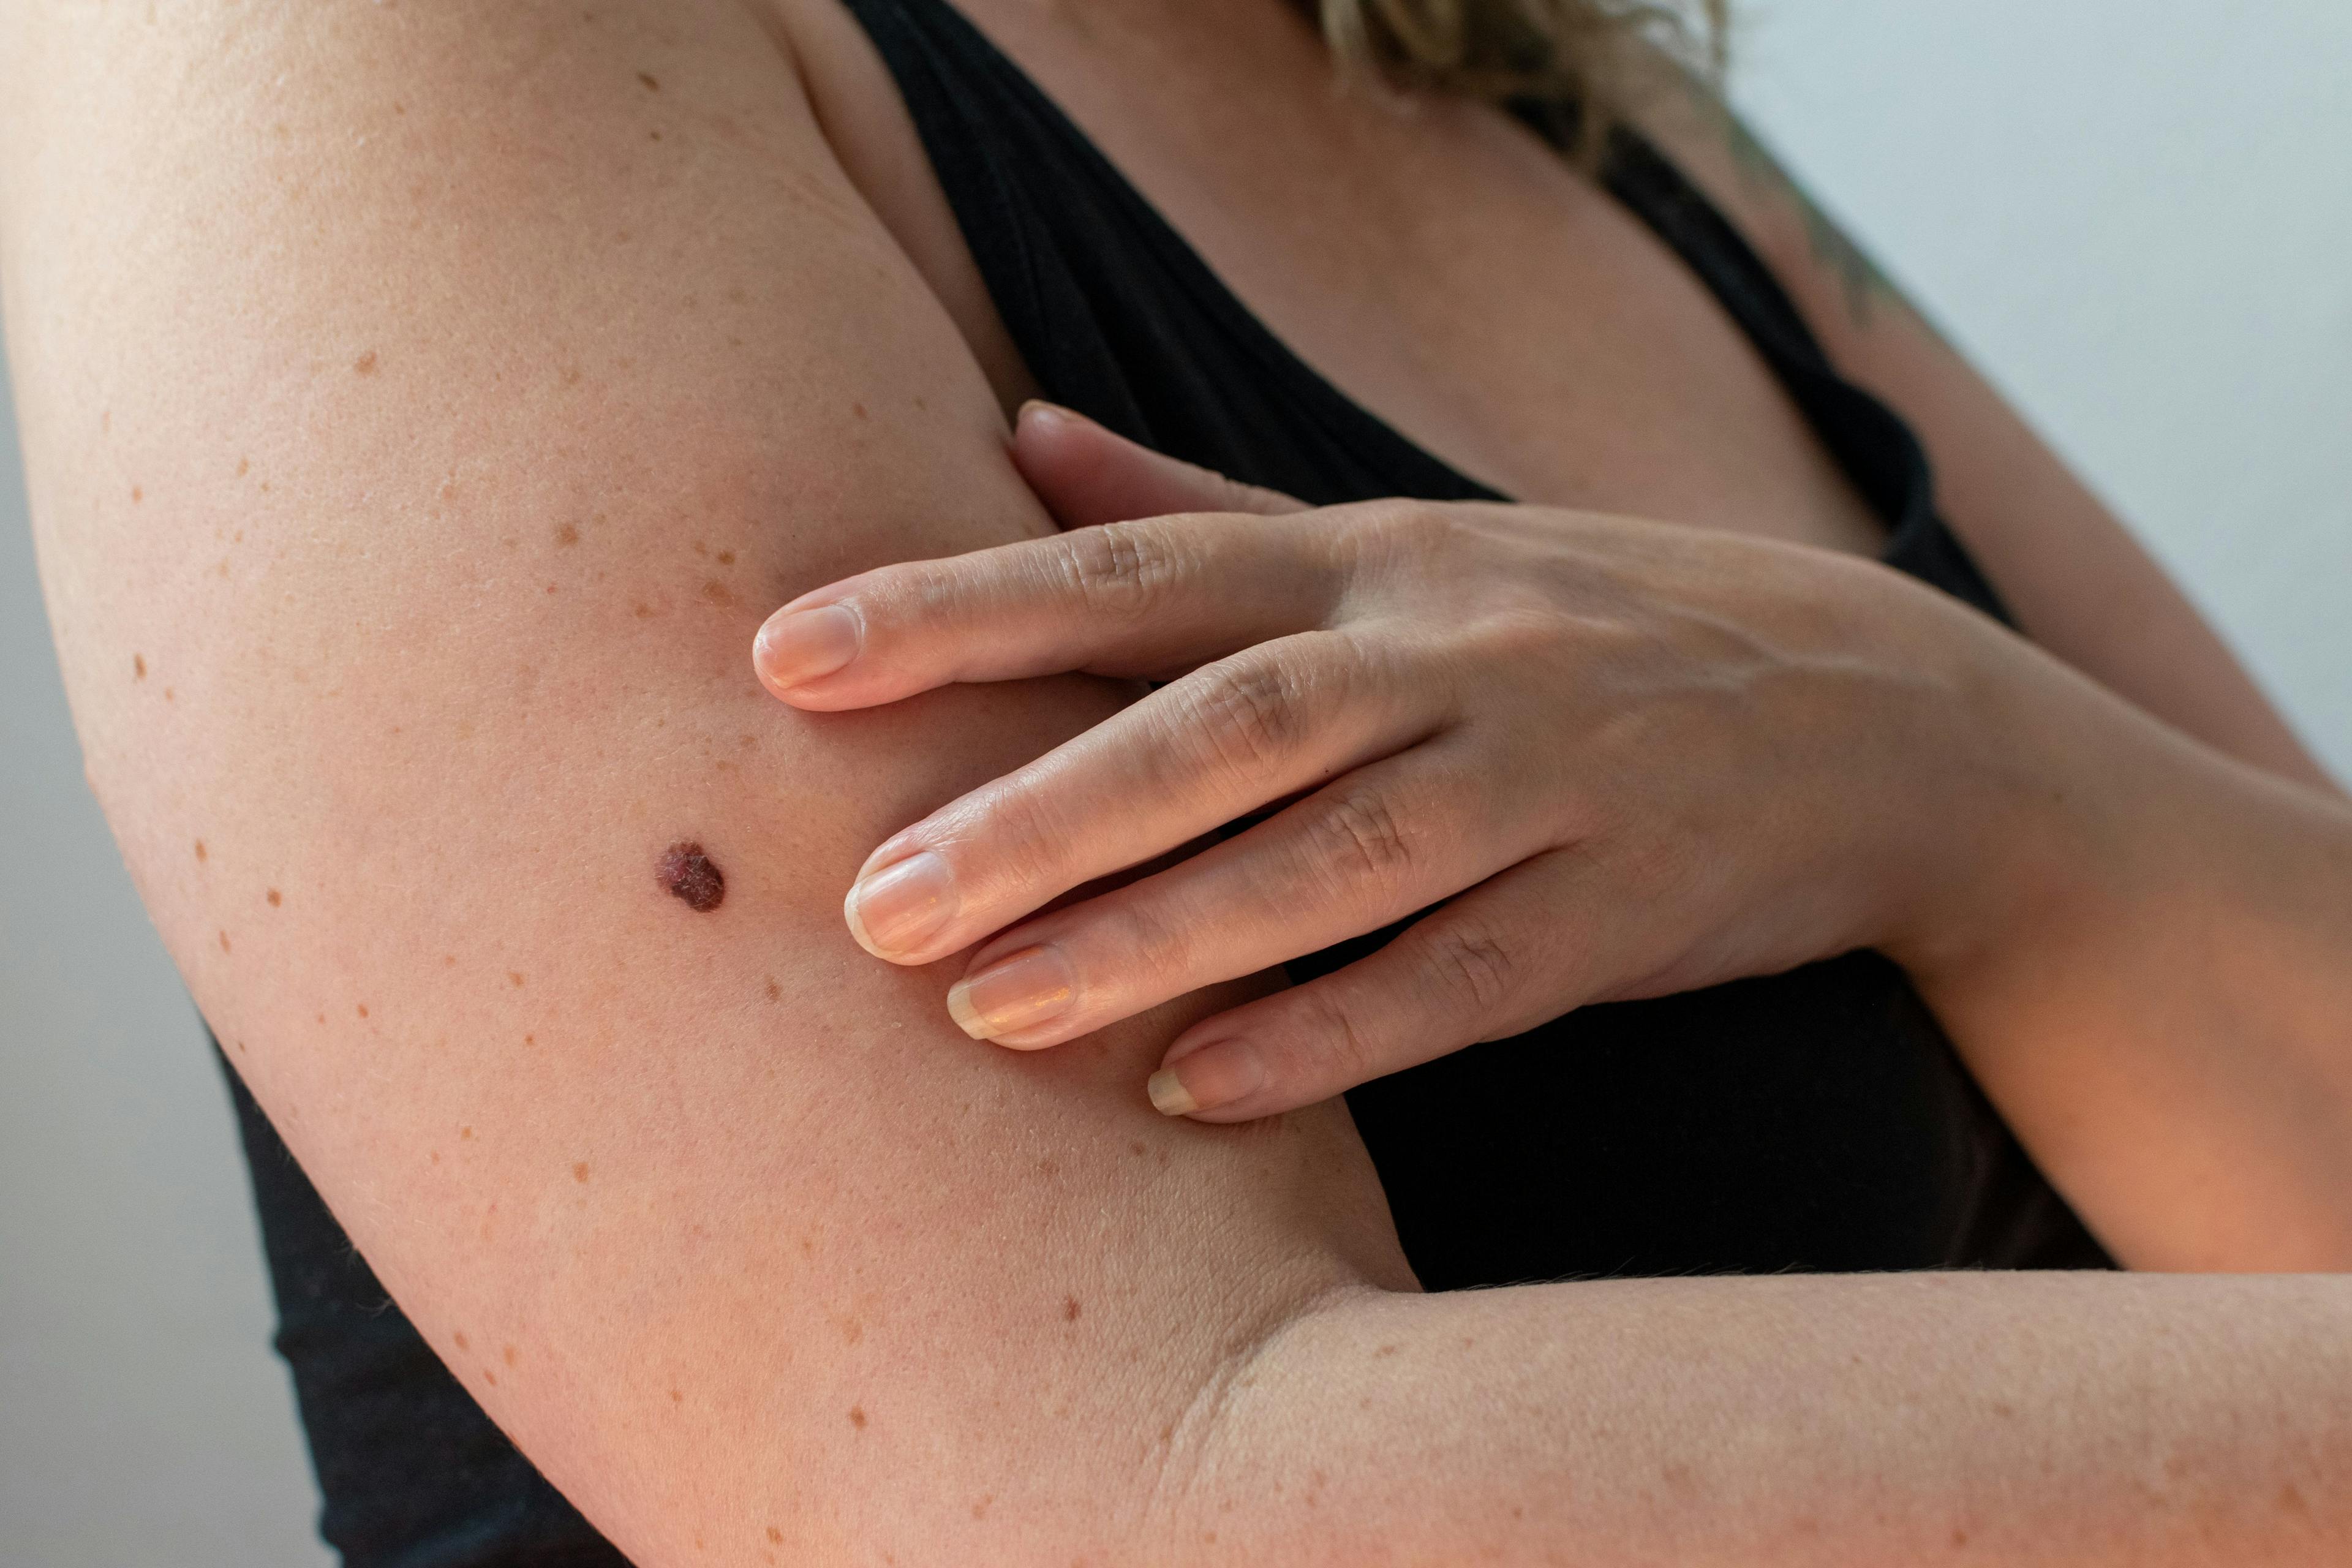 Woman checking her skin for signs of melanoma | Image credit: MW Photography - stock.adobe.com